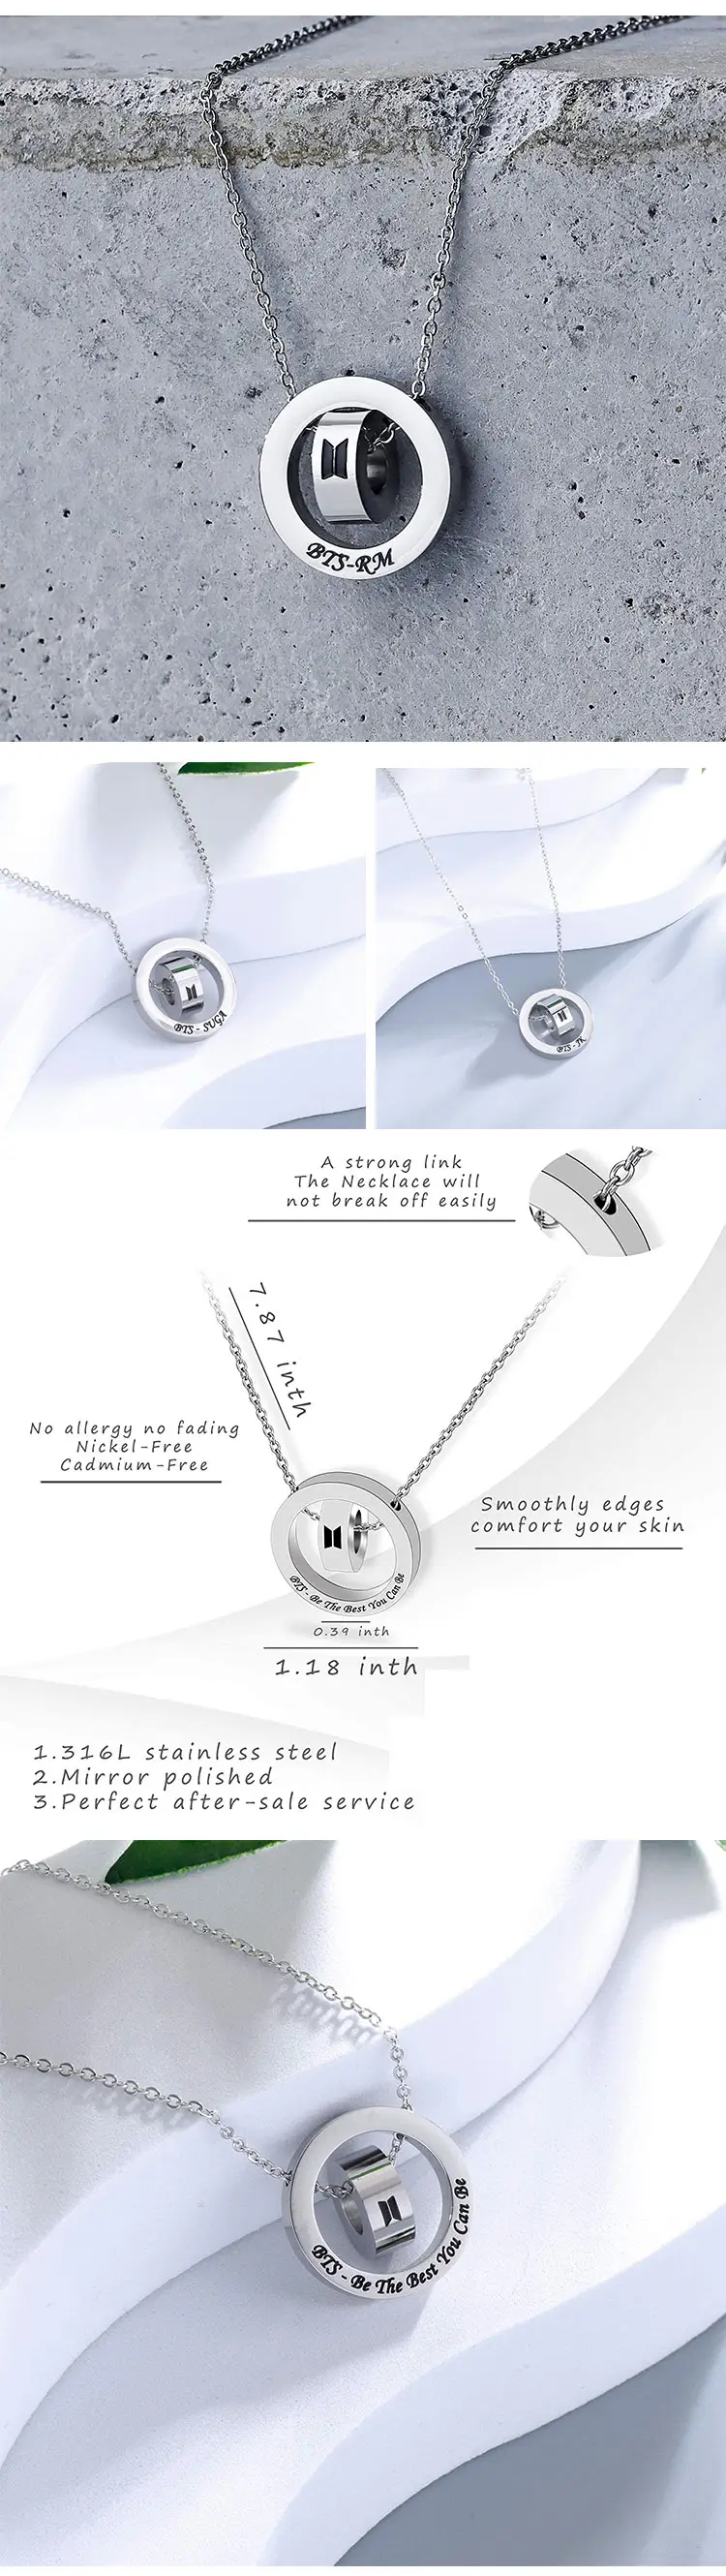 Kpop BTS JIMIN V SUGA JK Necklace Bagtag Boys Team Army Jewelry Gift BTS Logo double Circle Pendant Necklace